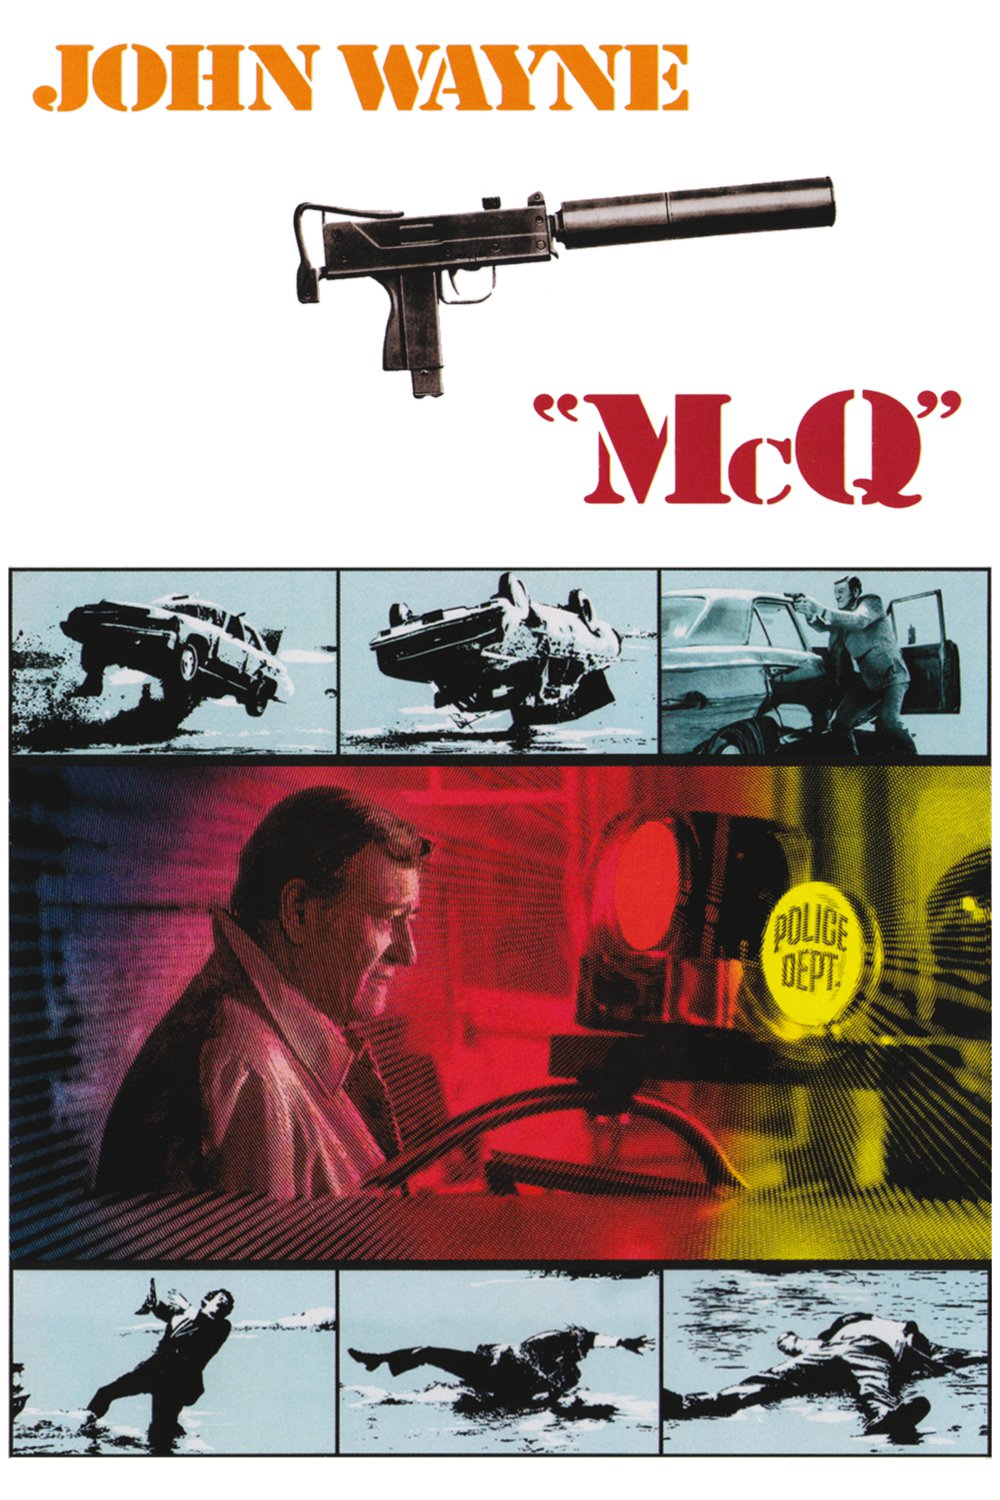 Poster for the movie "McQ"